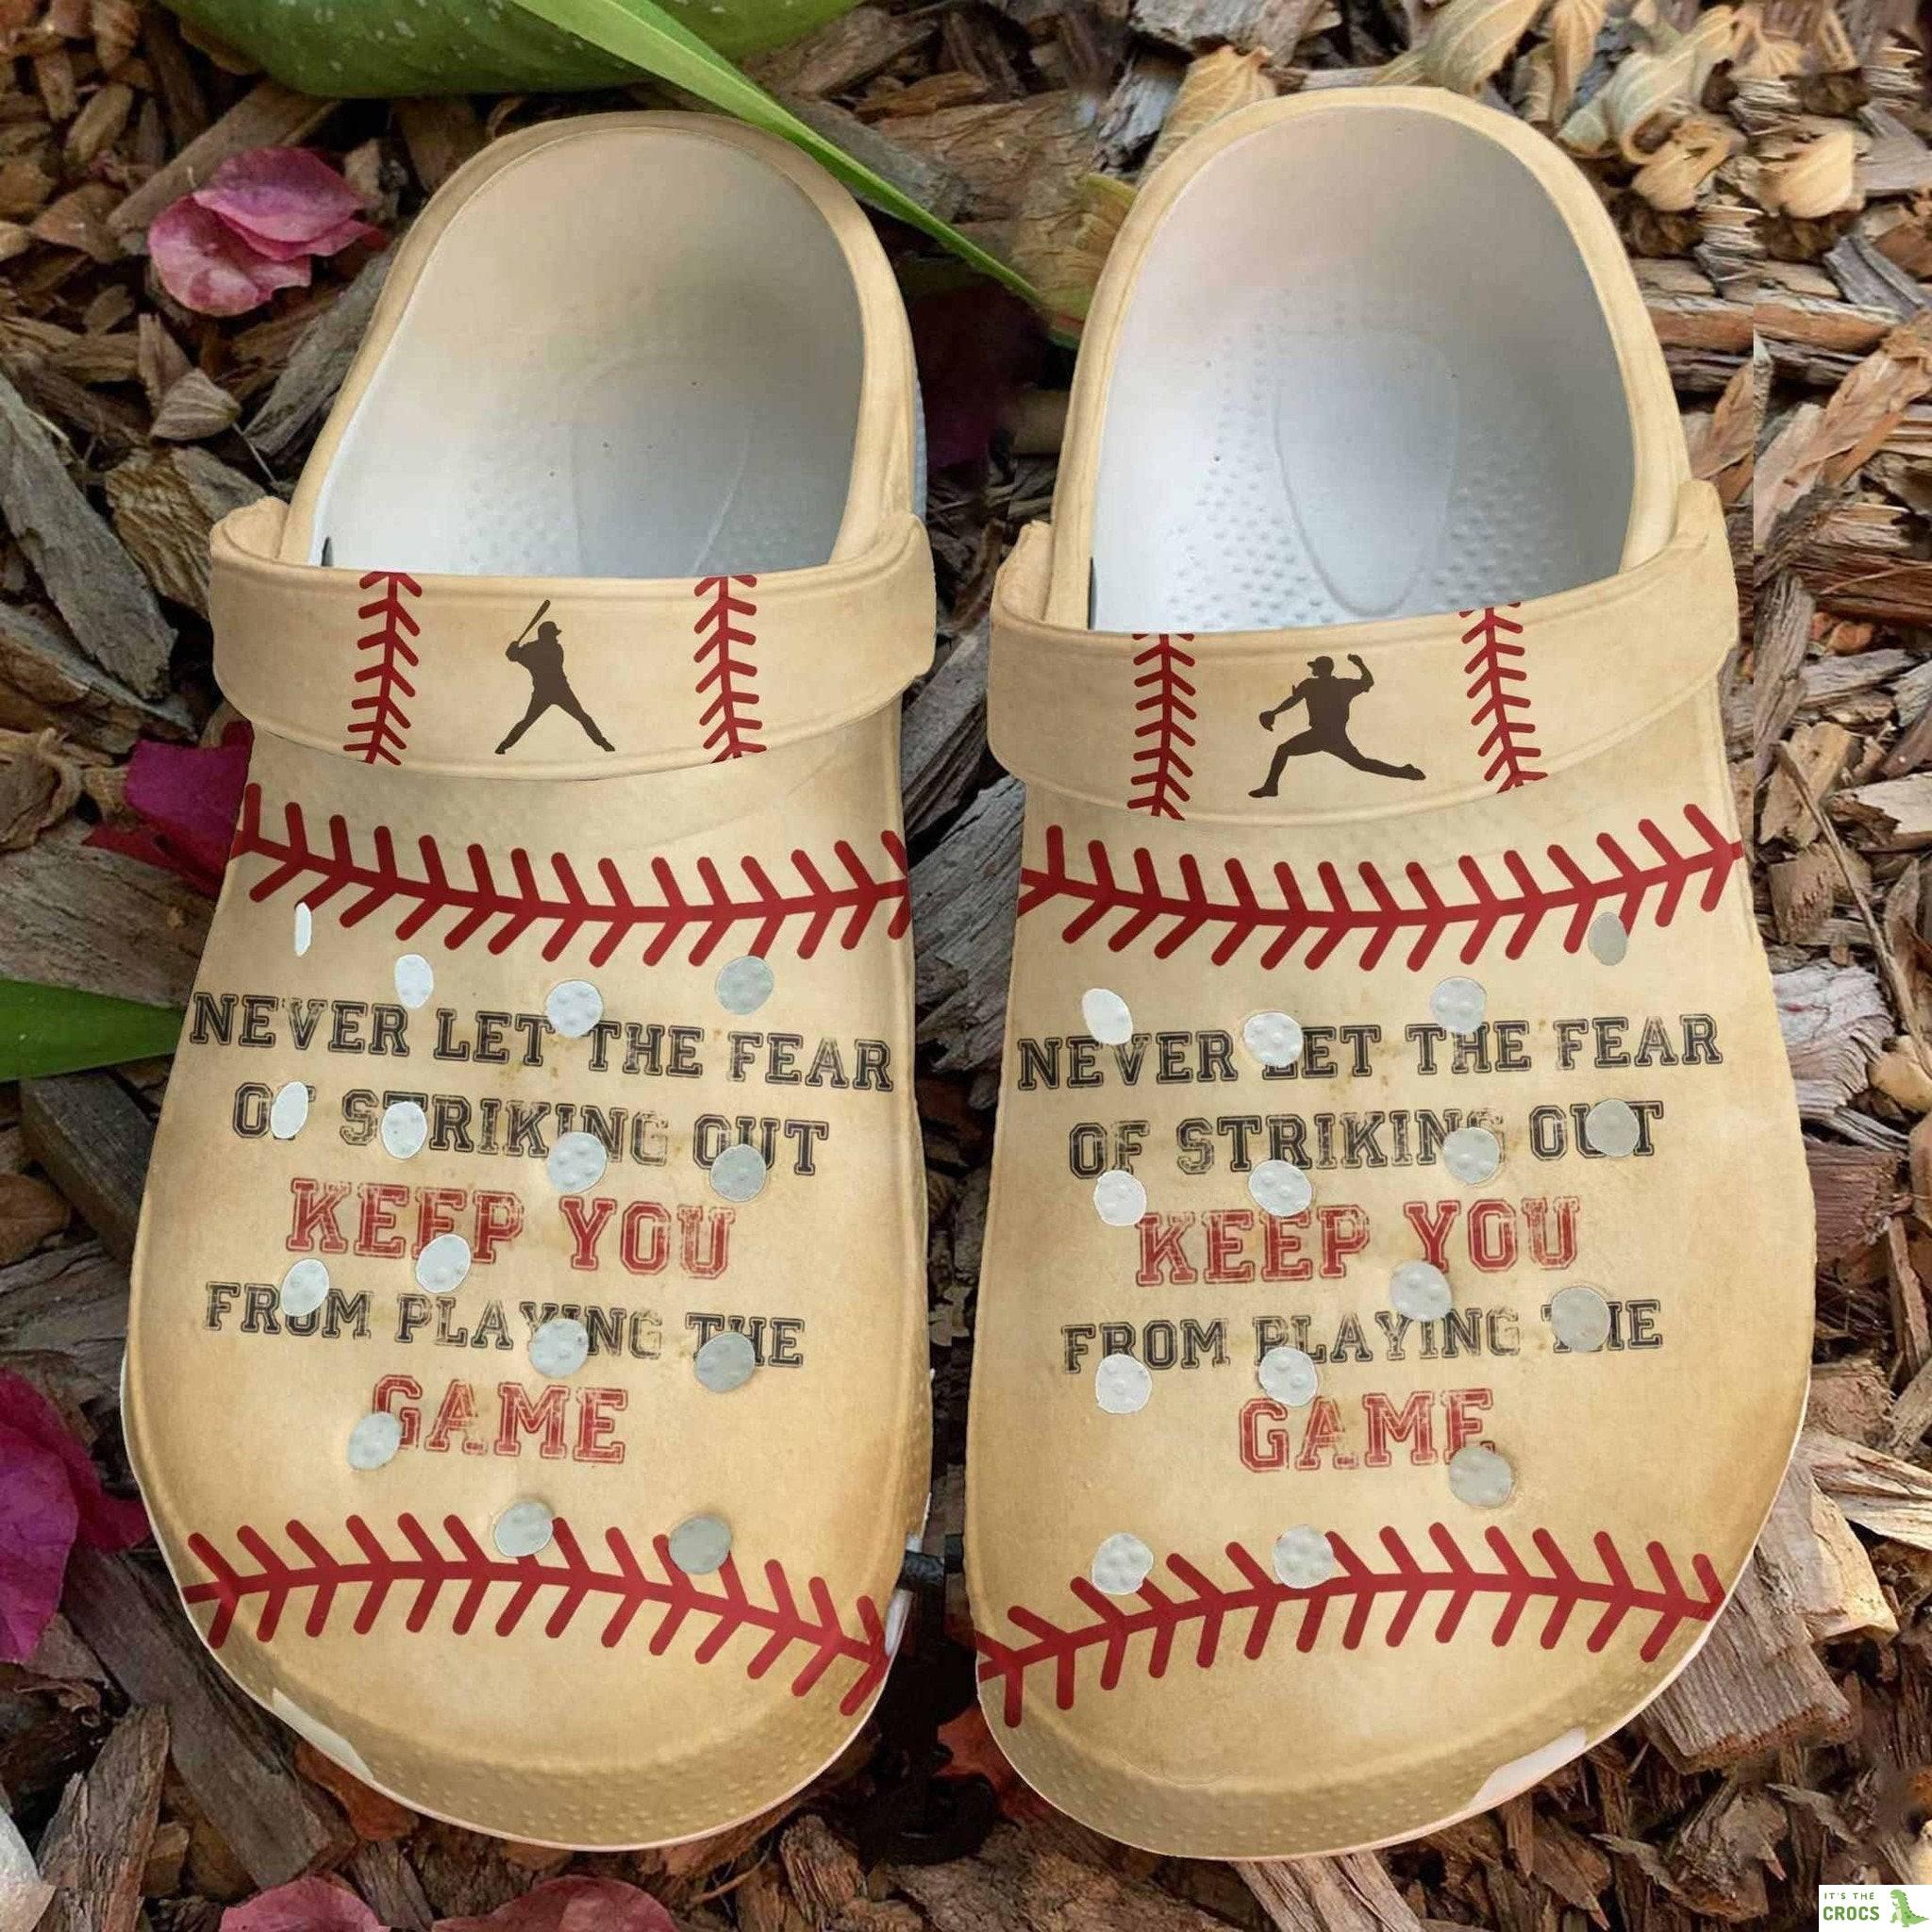 Baseball Motivation Crocs Shoes Clogs Gift For Son Fathers Day – Baseball Vintage Croc Shoes Gift Father Grandpa